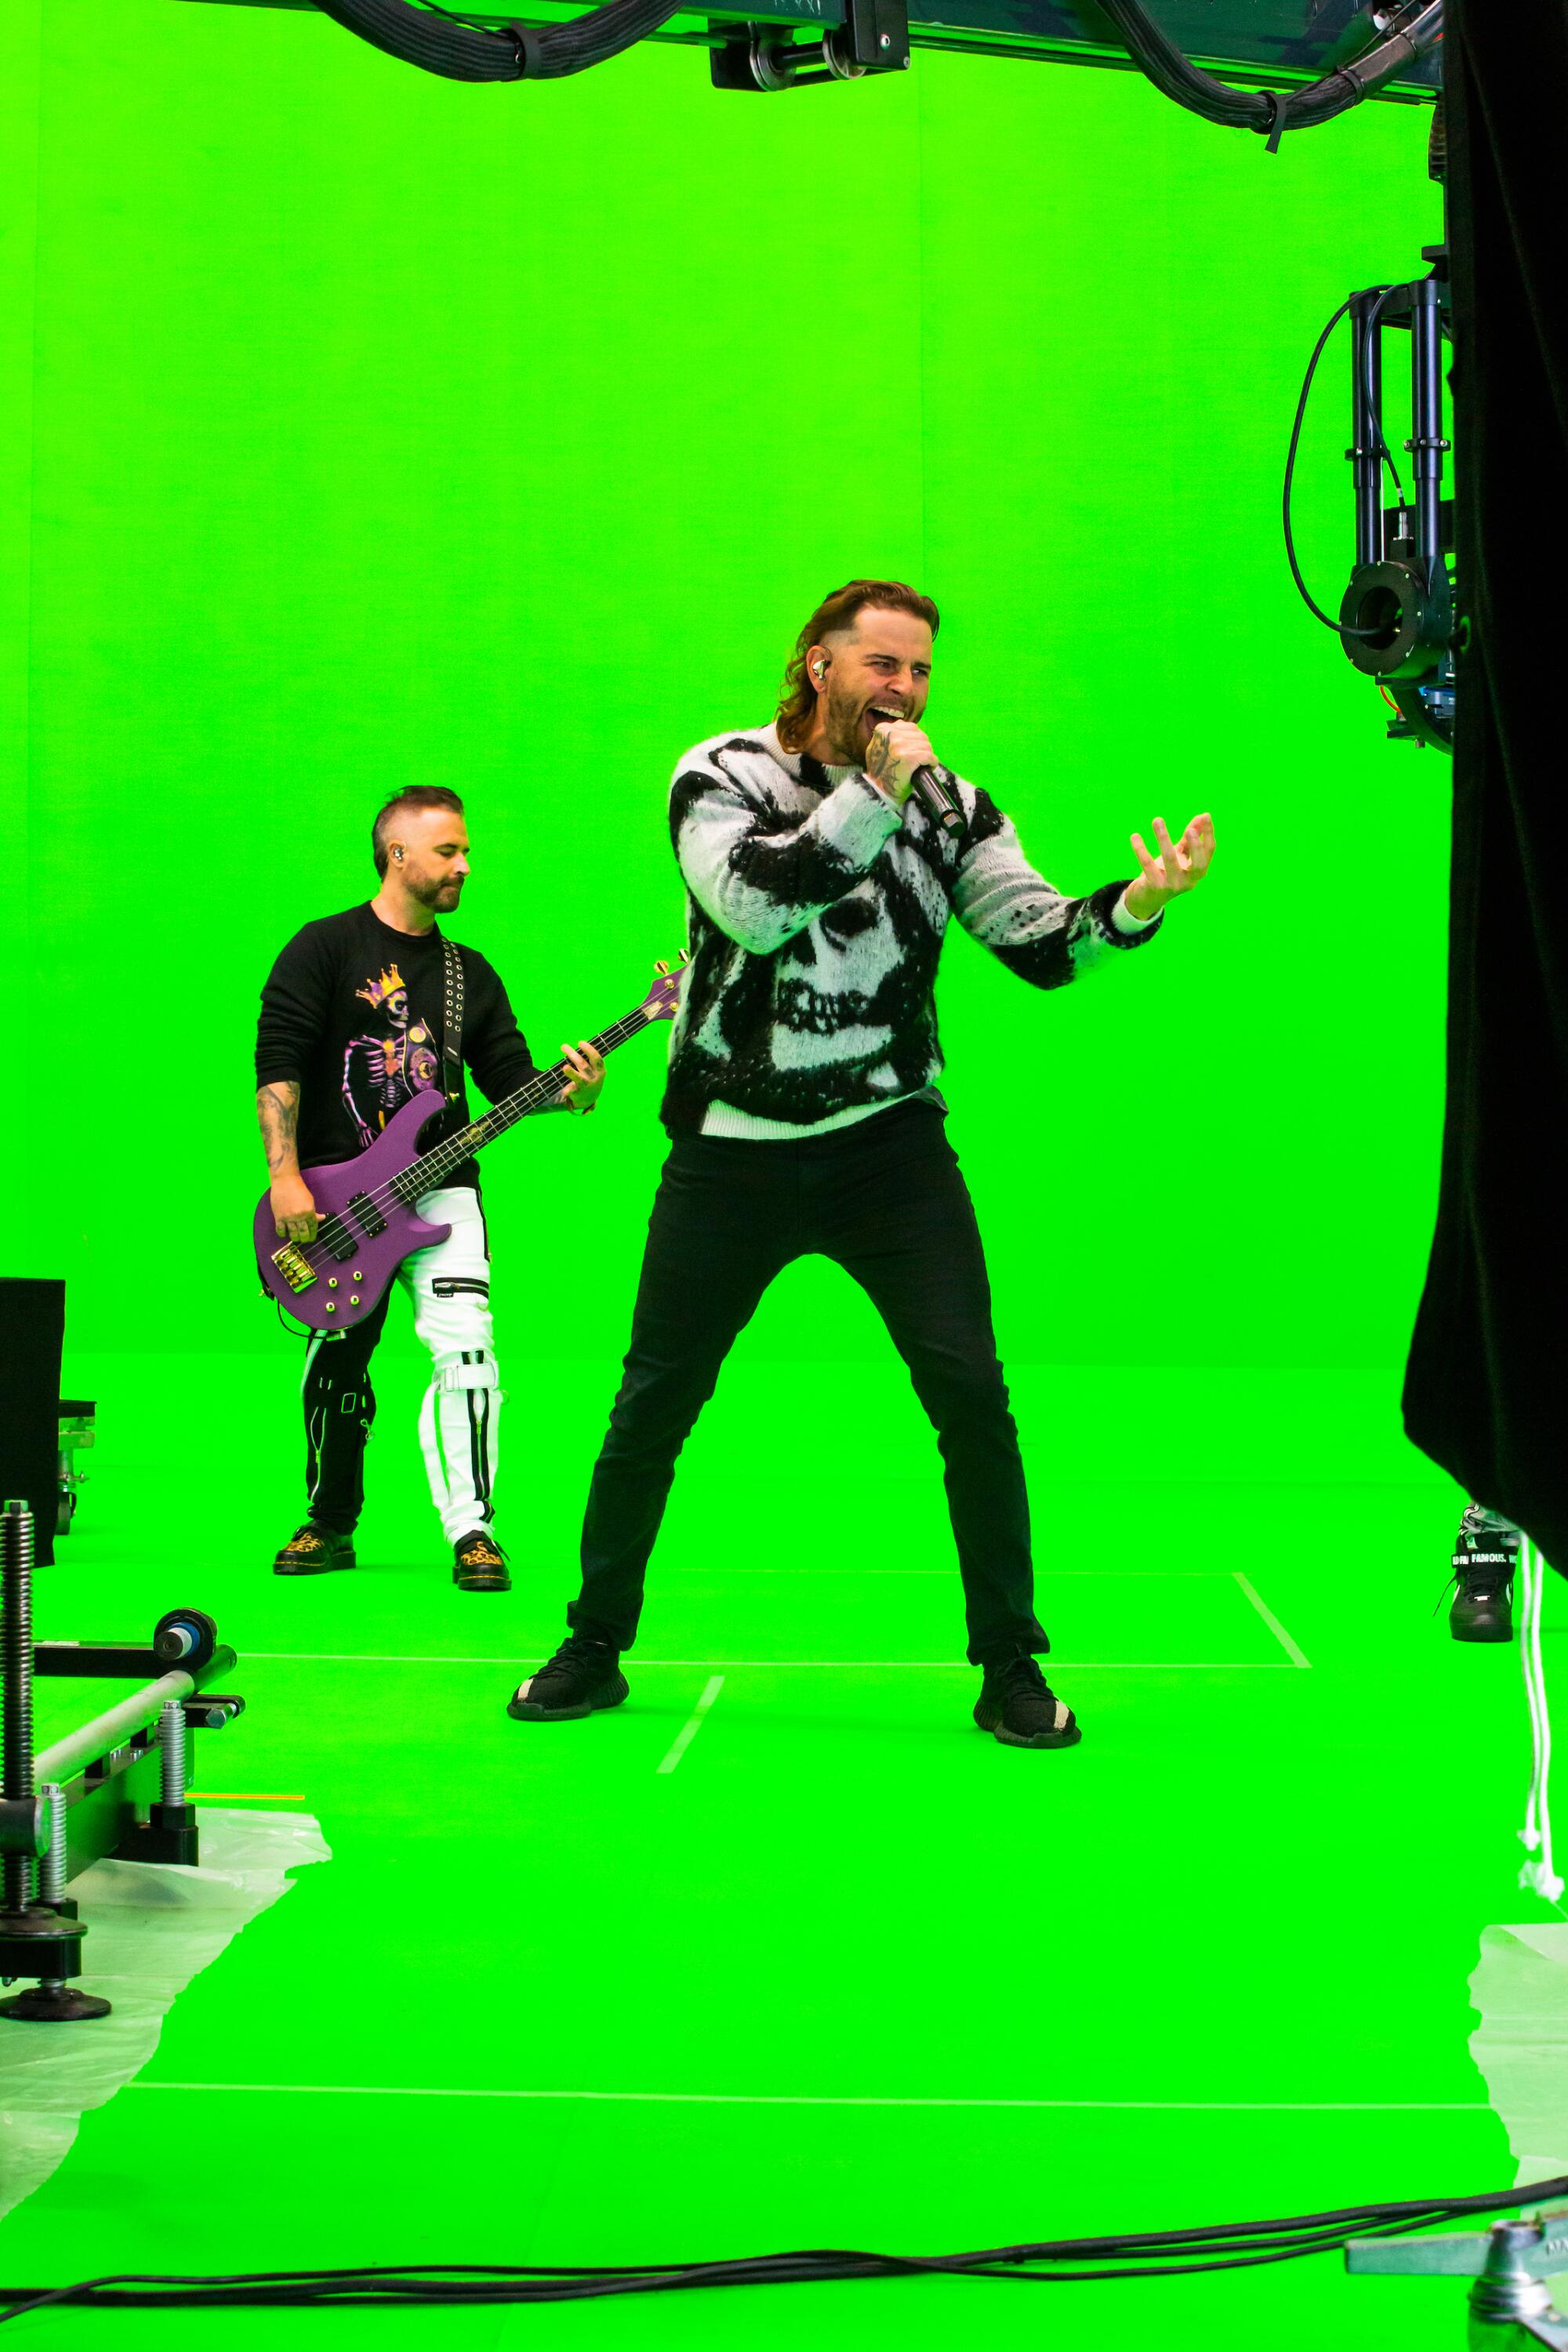 Lead singer M. Shadows sings to a camera.